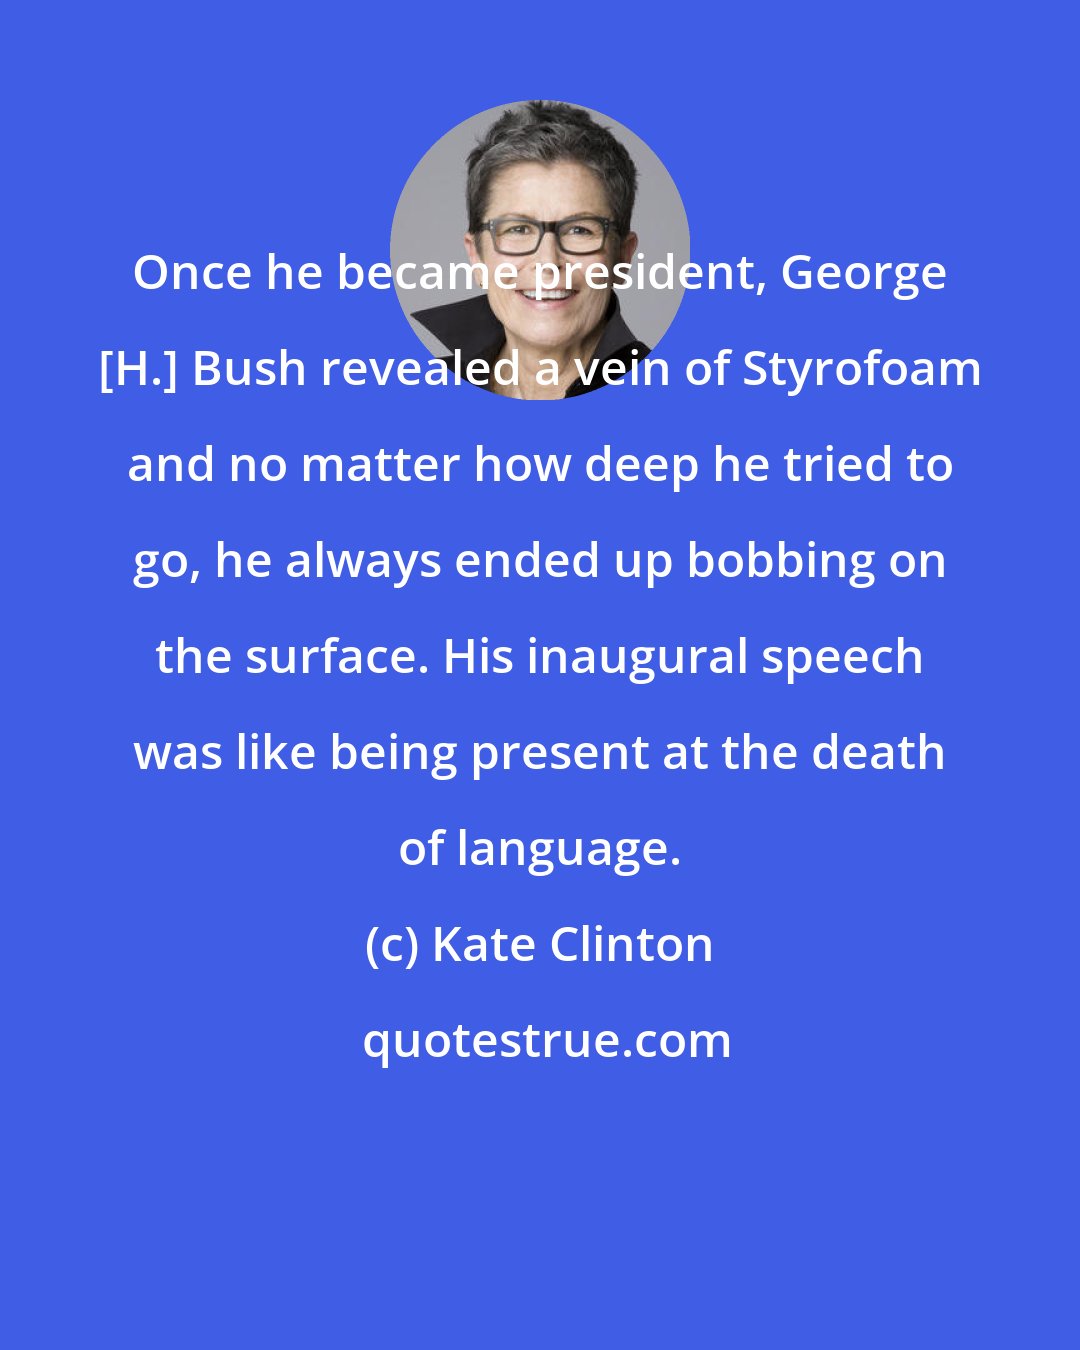 Kate Clinton: Once he became president, George [H.] Bush revealed a vein of Styrofoam and no matter how deep he tried to go, he always ended up bobbing on the surface. His inaugural speech was like being present at the death of language.